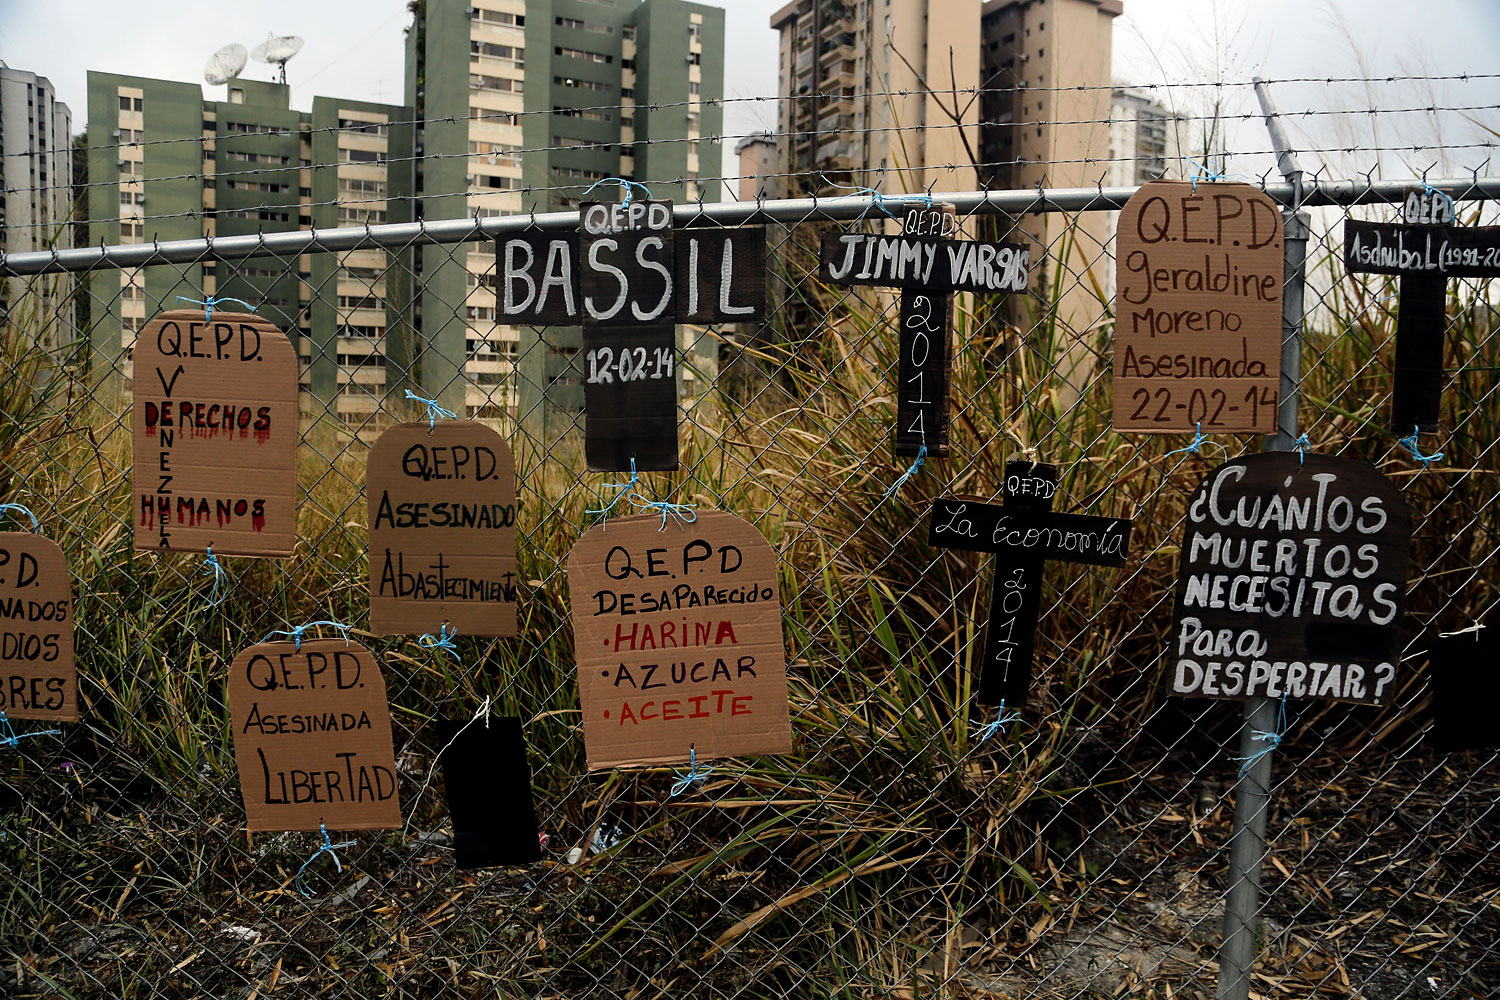 Cardboard cutouts in shapes of headstones and crosses and tied to a fence, bear anti-government protest slogans and names of those who have died in recent protests, in Caracas, March 5, 2014.